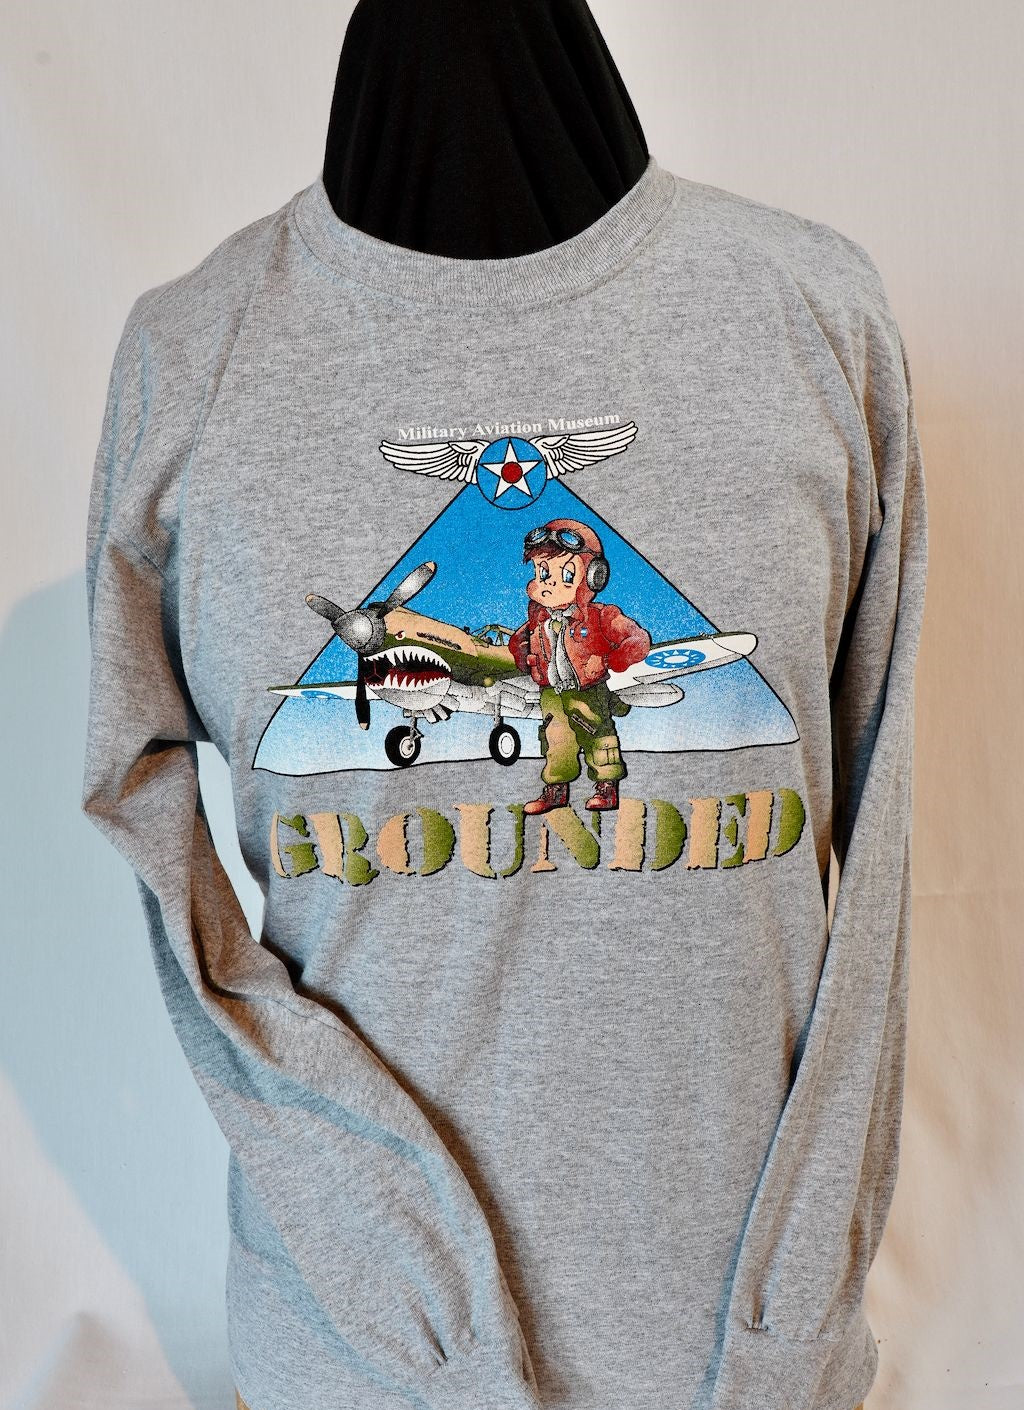 Youth Grounded Long Sleeve Tee